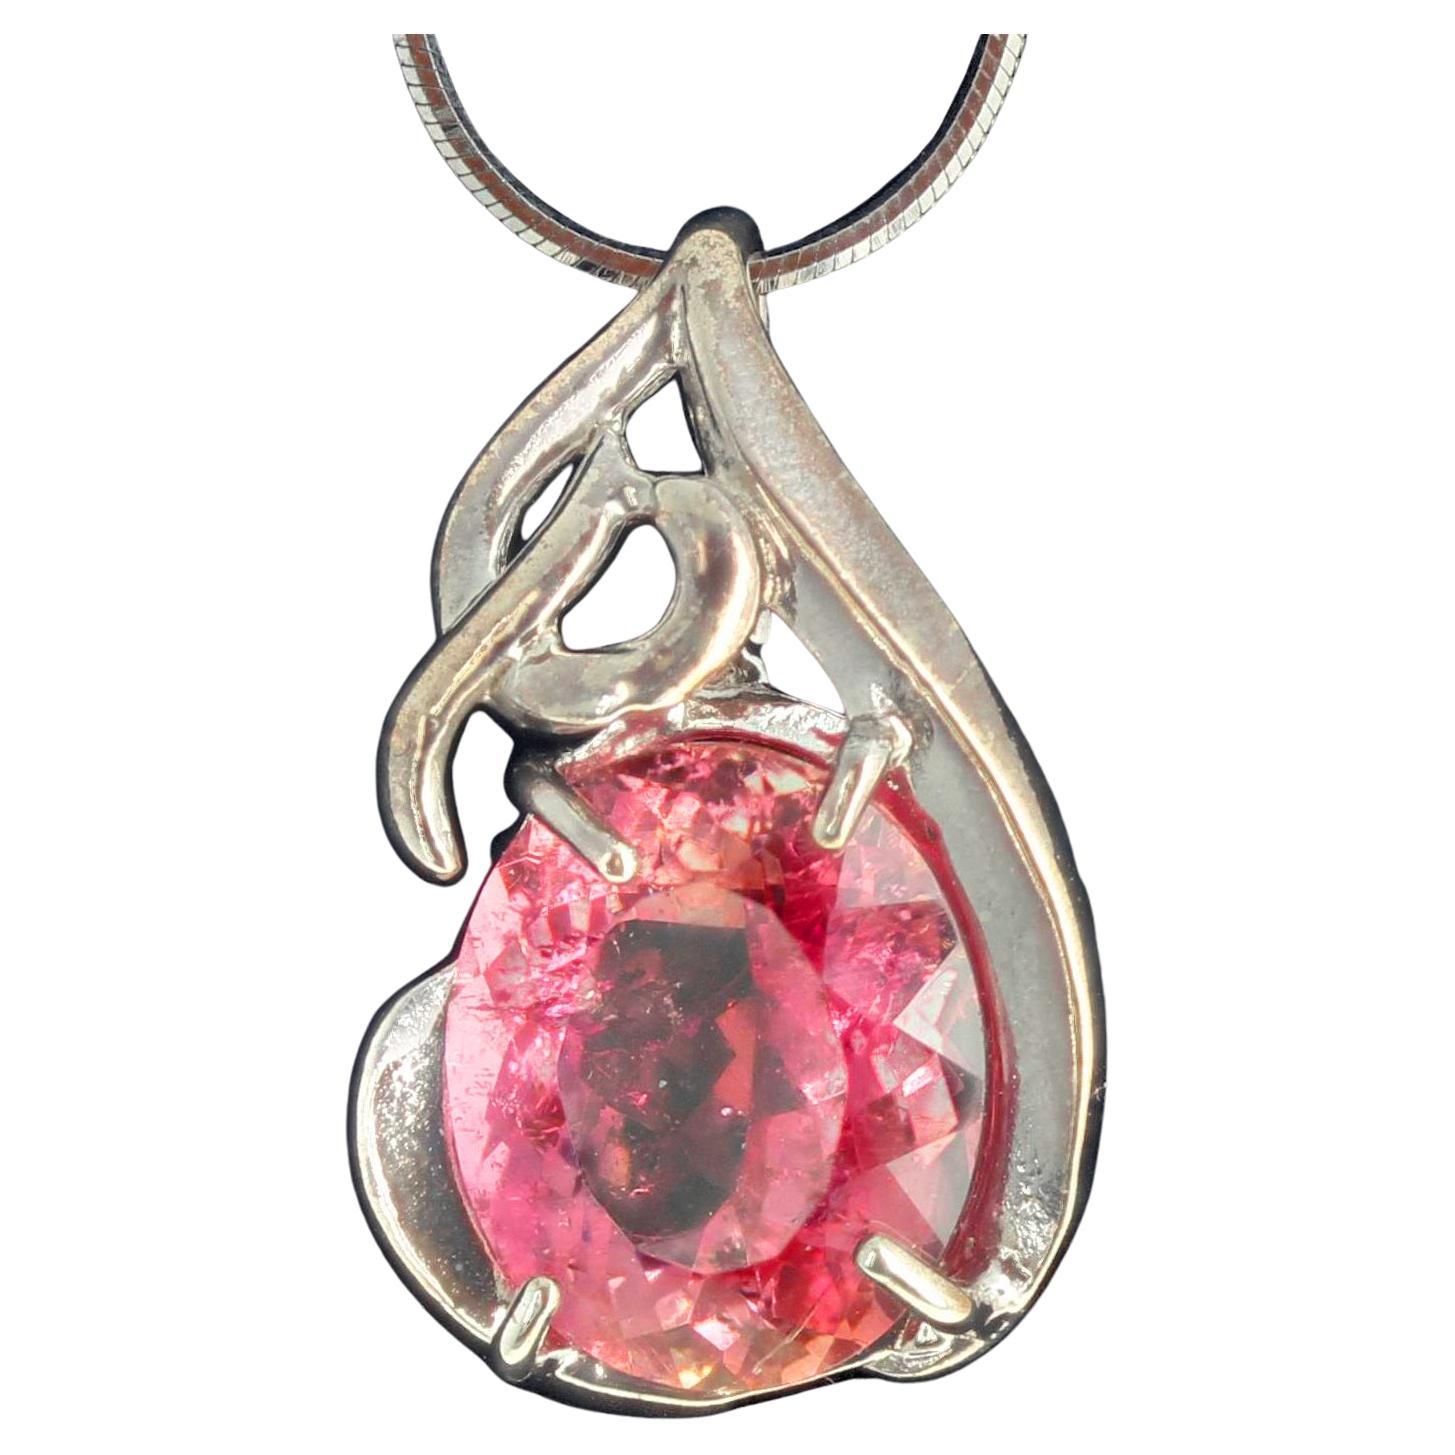 Unique Handmade glittering pink with apricot glitters around the edges 7 carat Tourmaline set in a lovely Sterling Silver pendant that hangs approximately .78 inches long. 